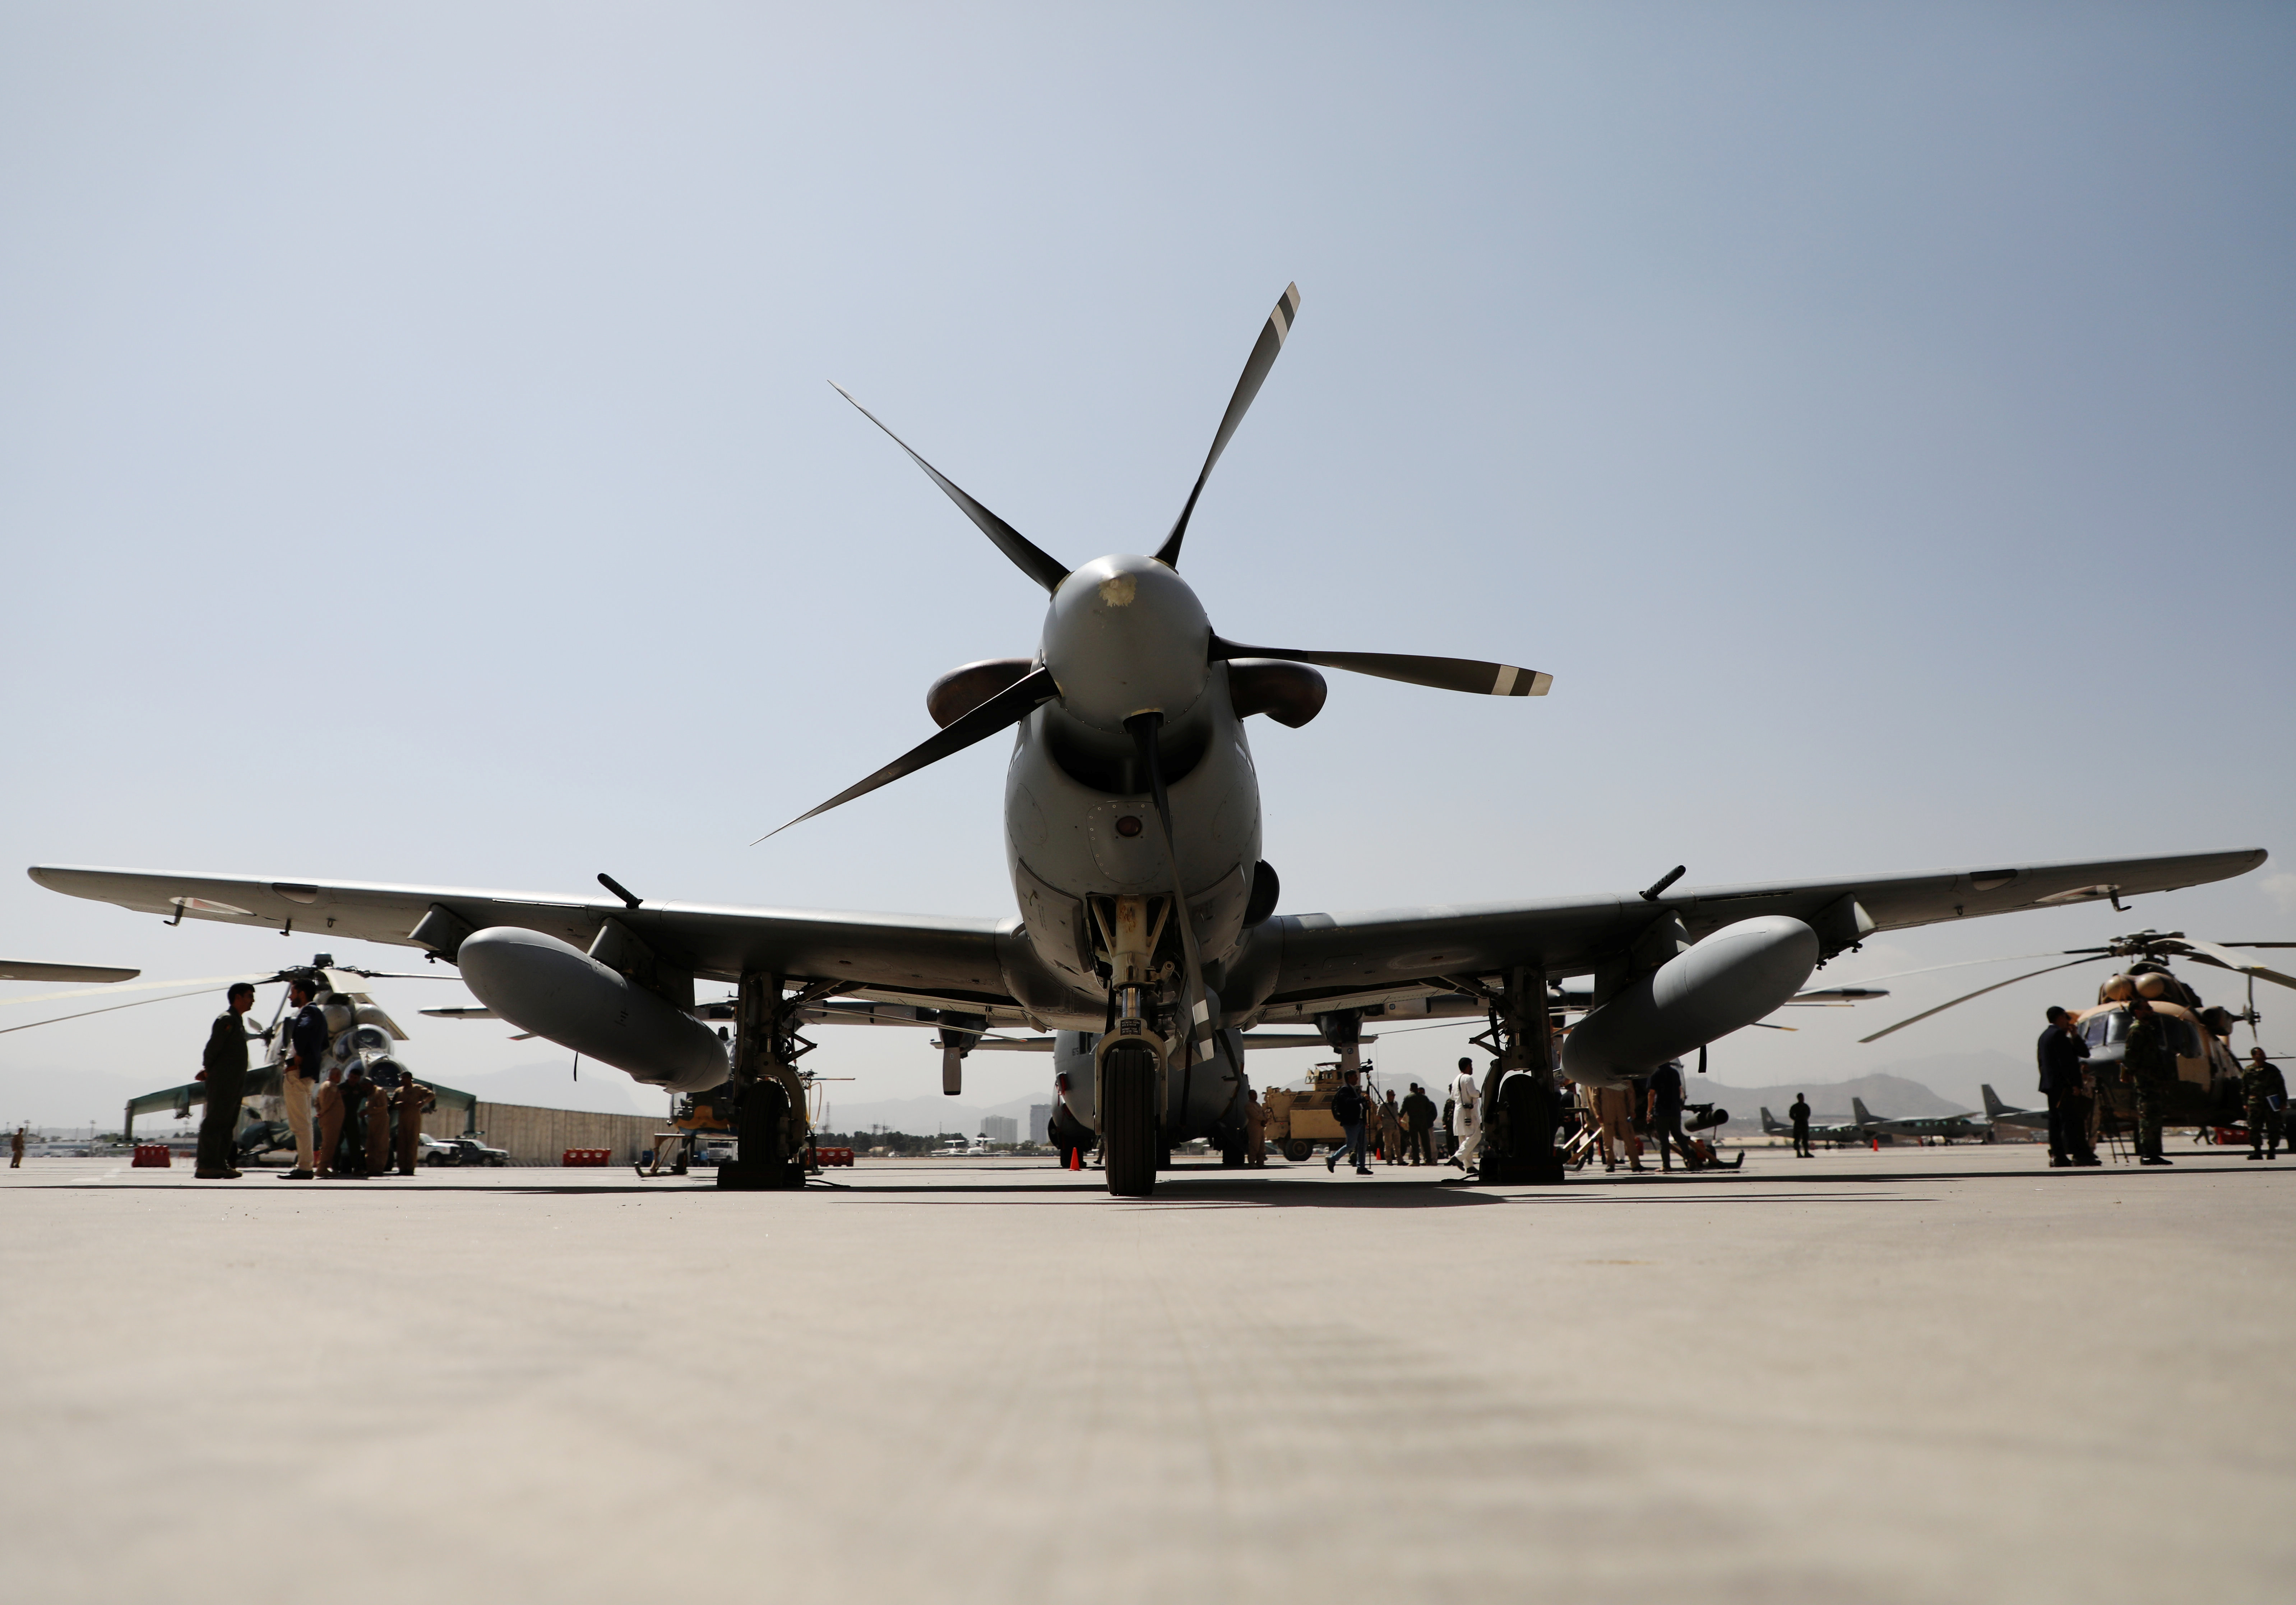 An A-29 Super Tucano aircraft, is seen displayed during a handover ceremony of A-29 Super Tucano planes from U.S. to the Afghan forces, in Kabul, Afghanistan